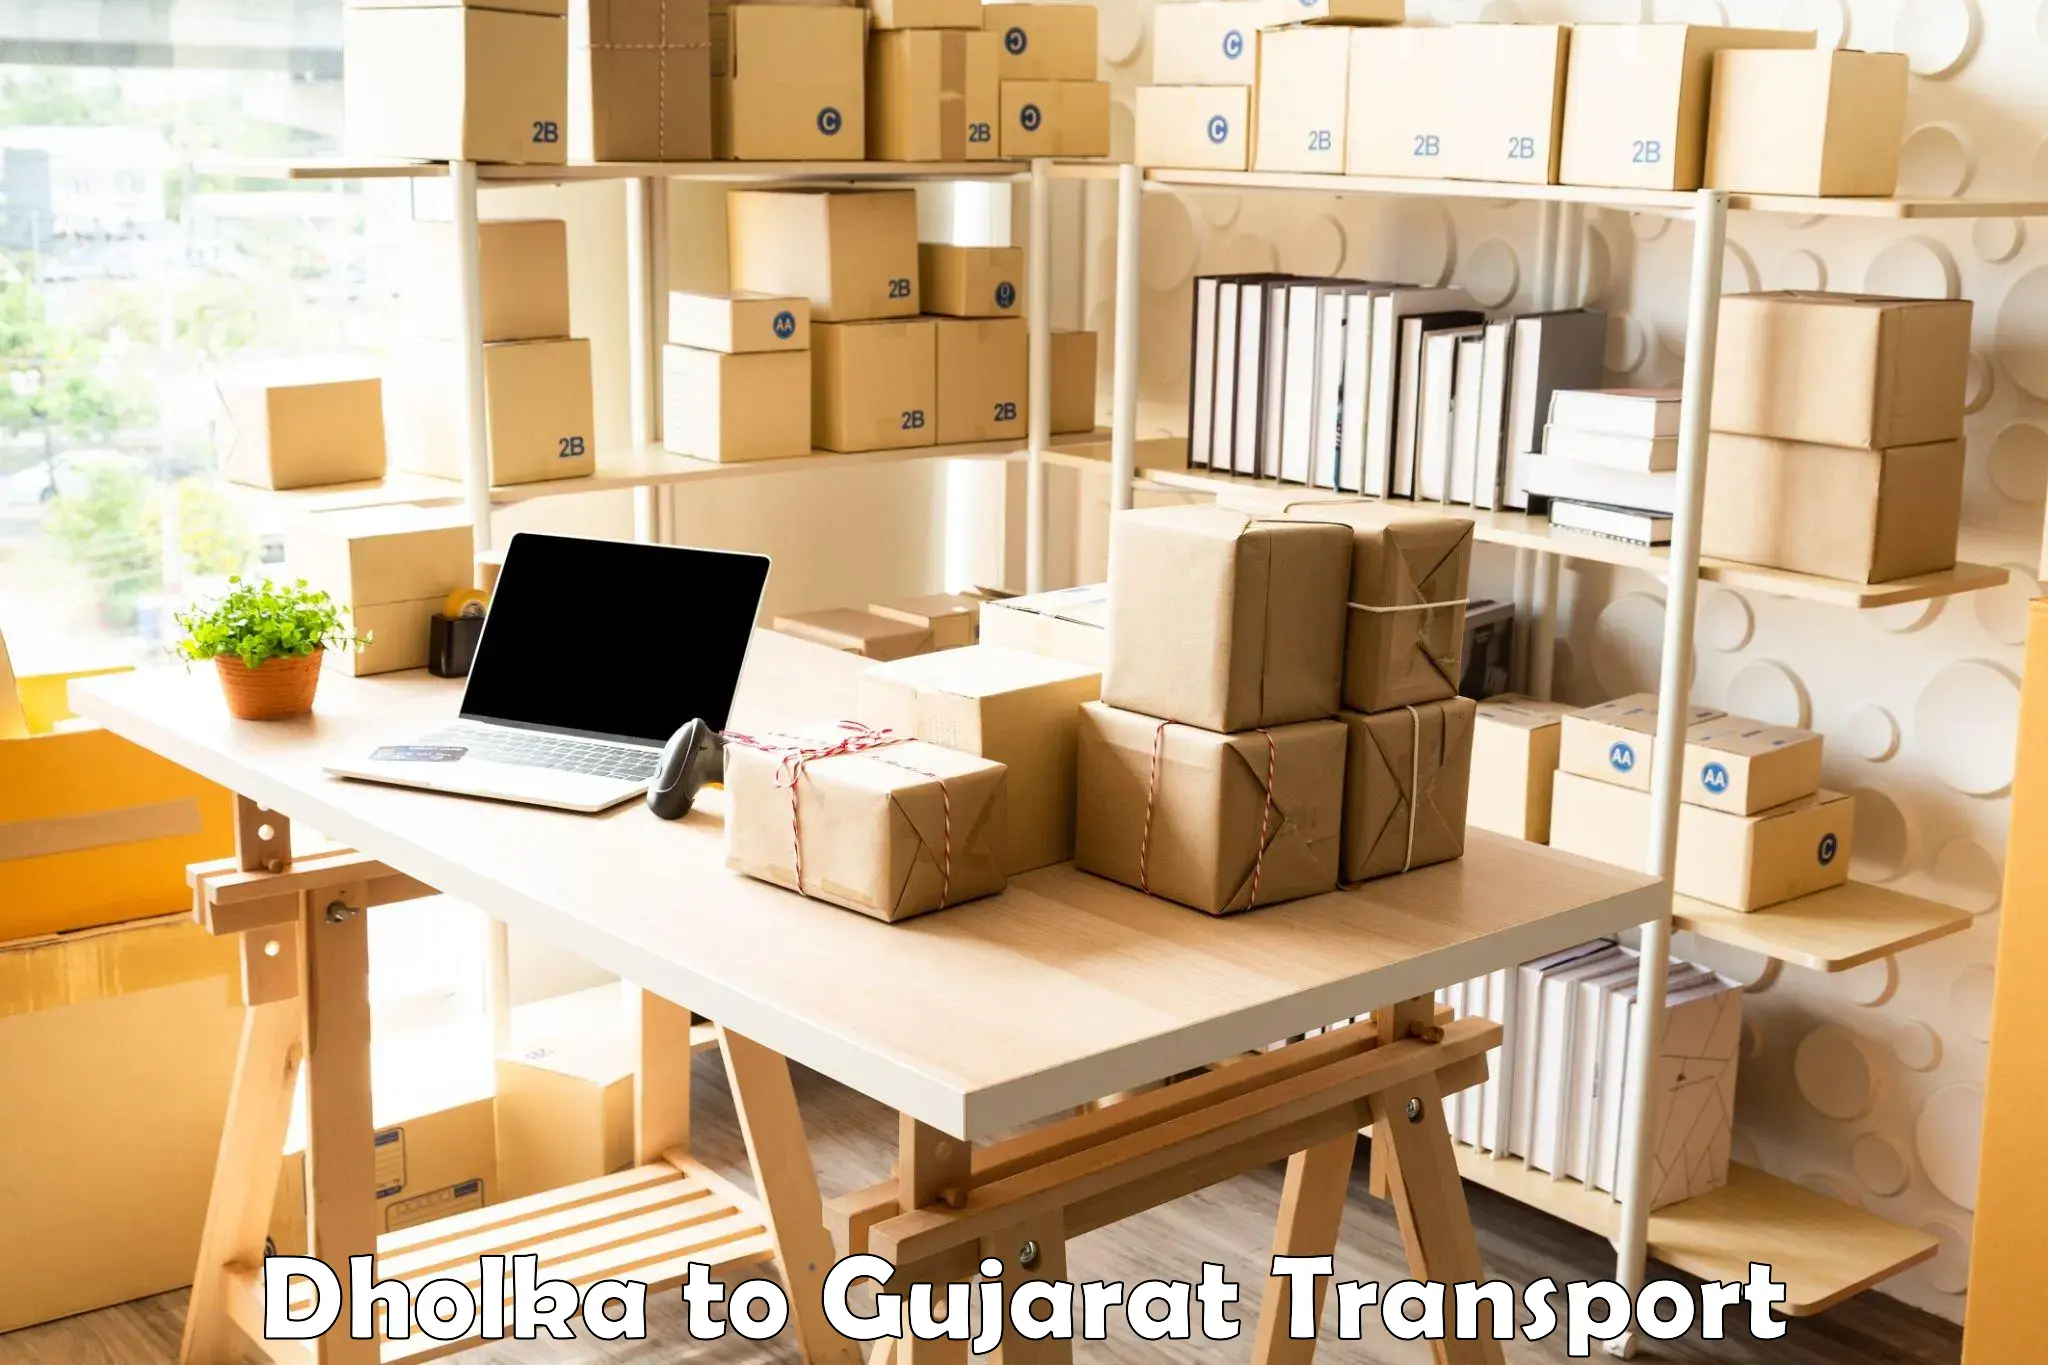 Express transport services Dholka to Mehsana